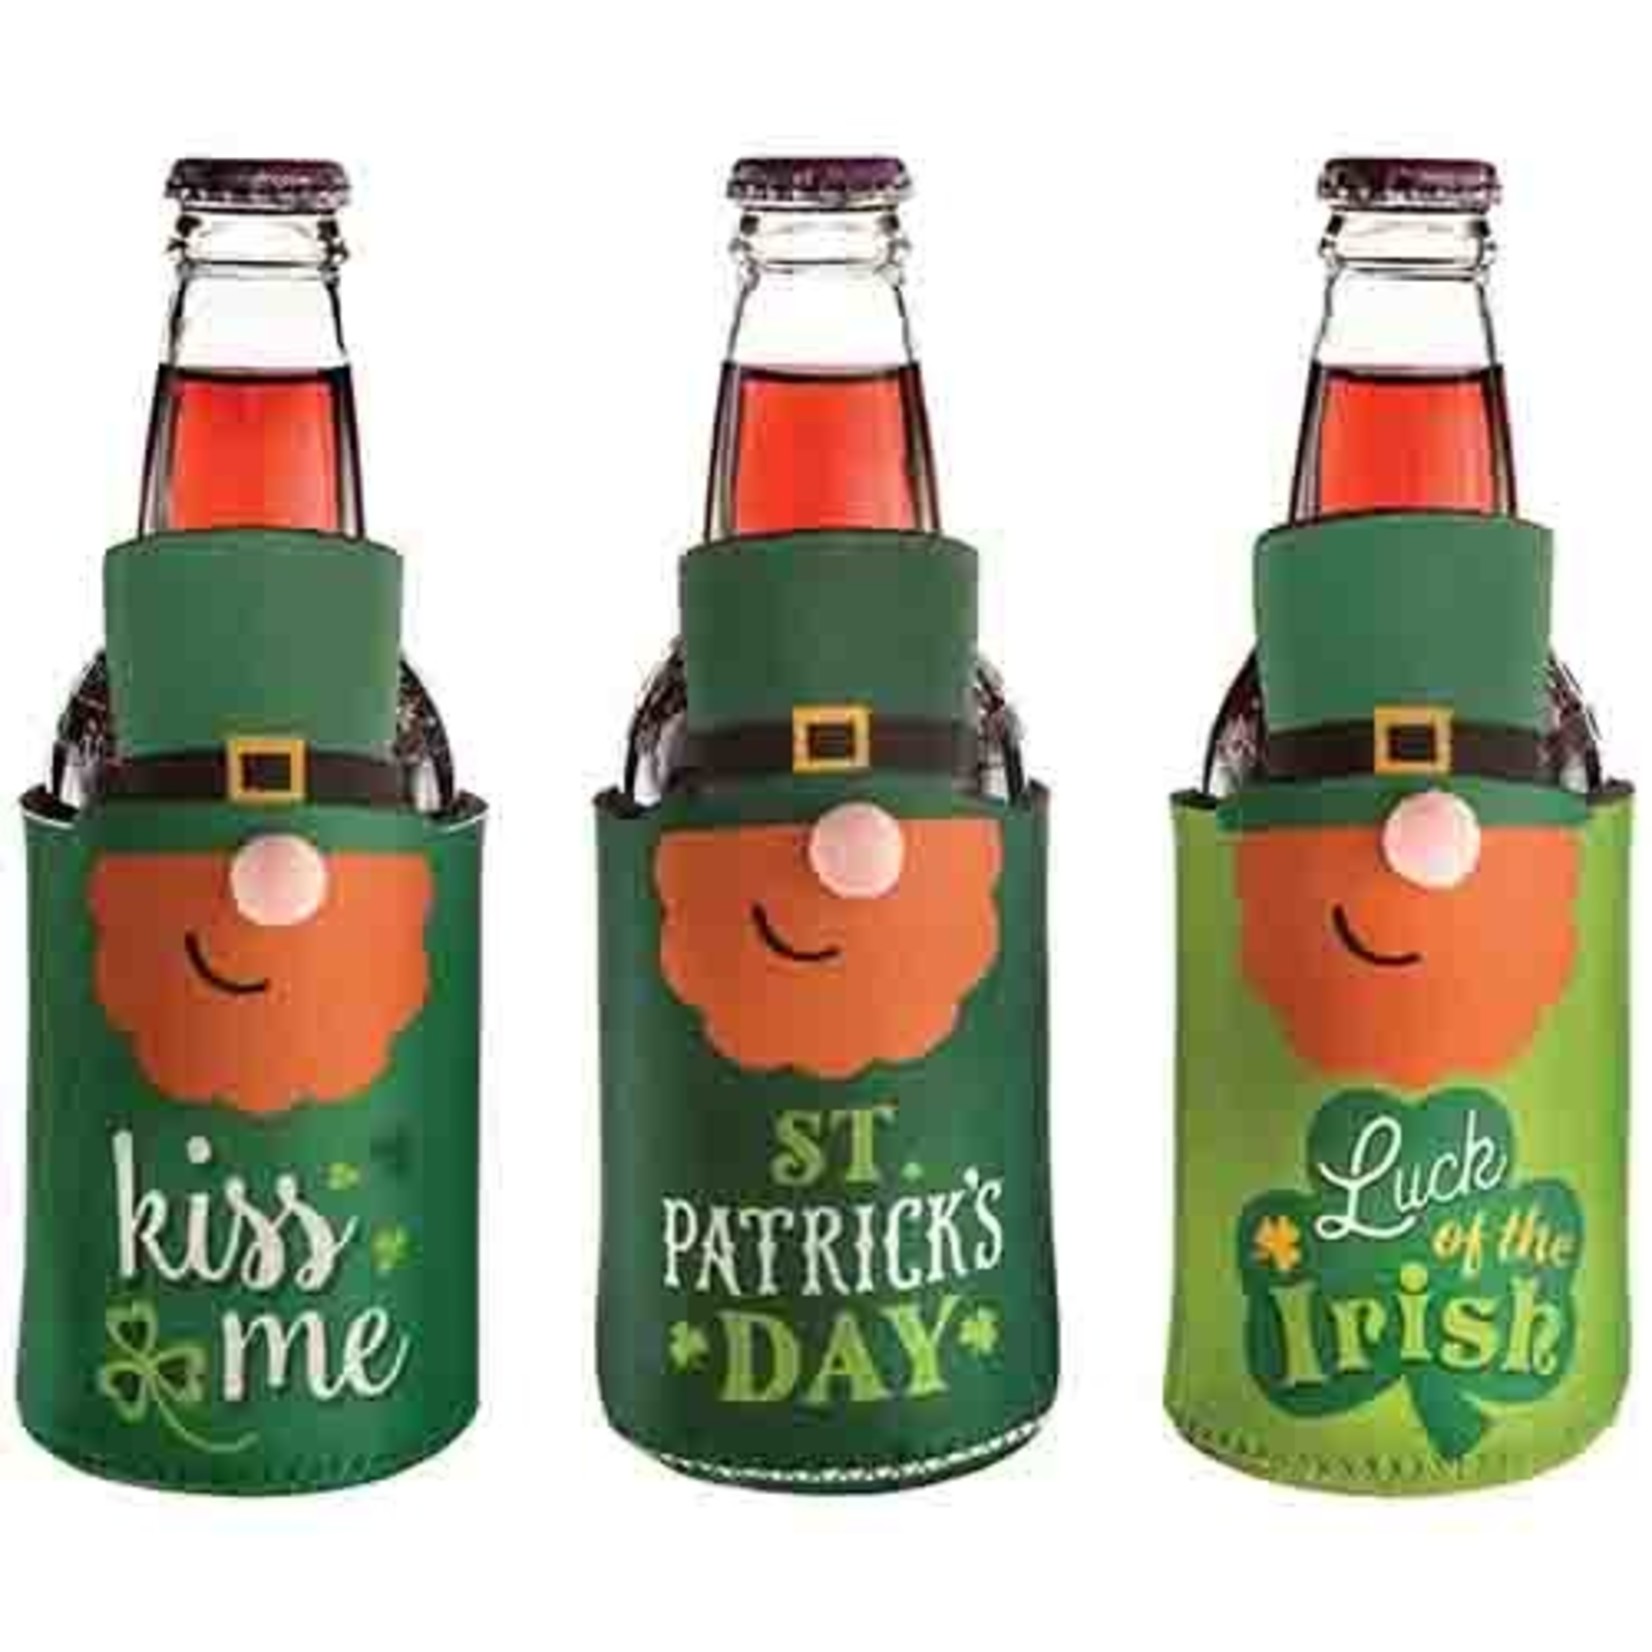 Amscan St. Patrick's Day Beer Bottle Covers - 3ct.